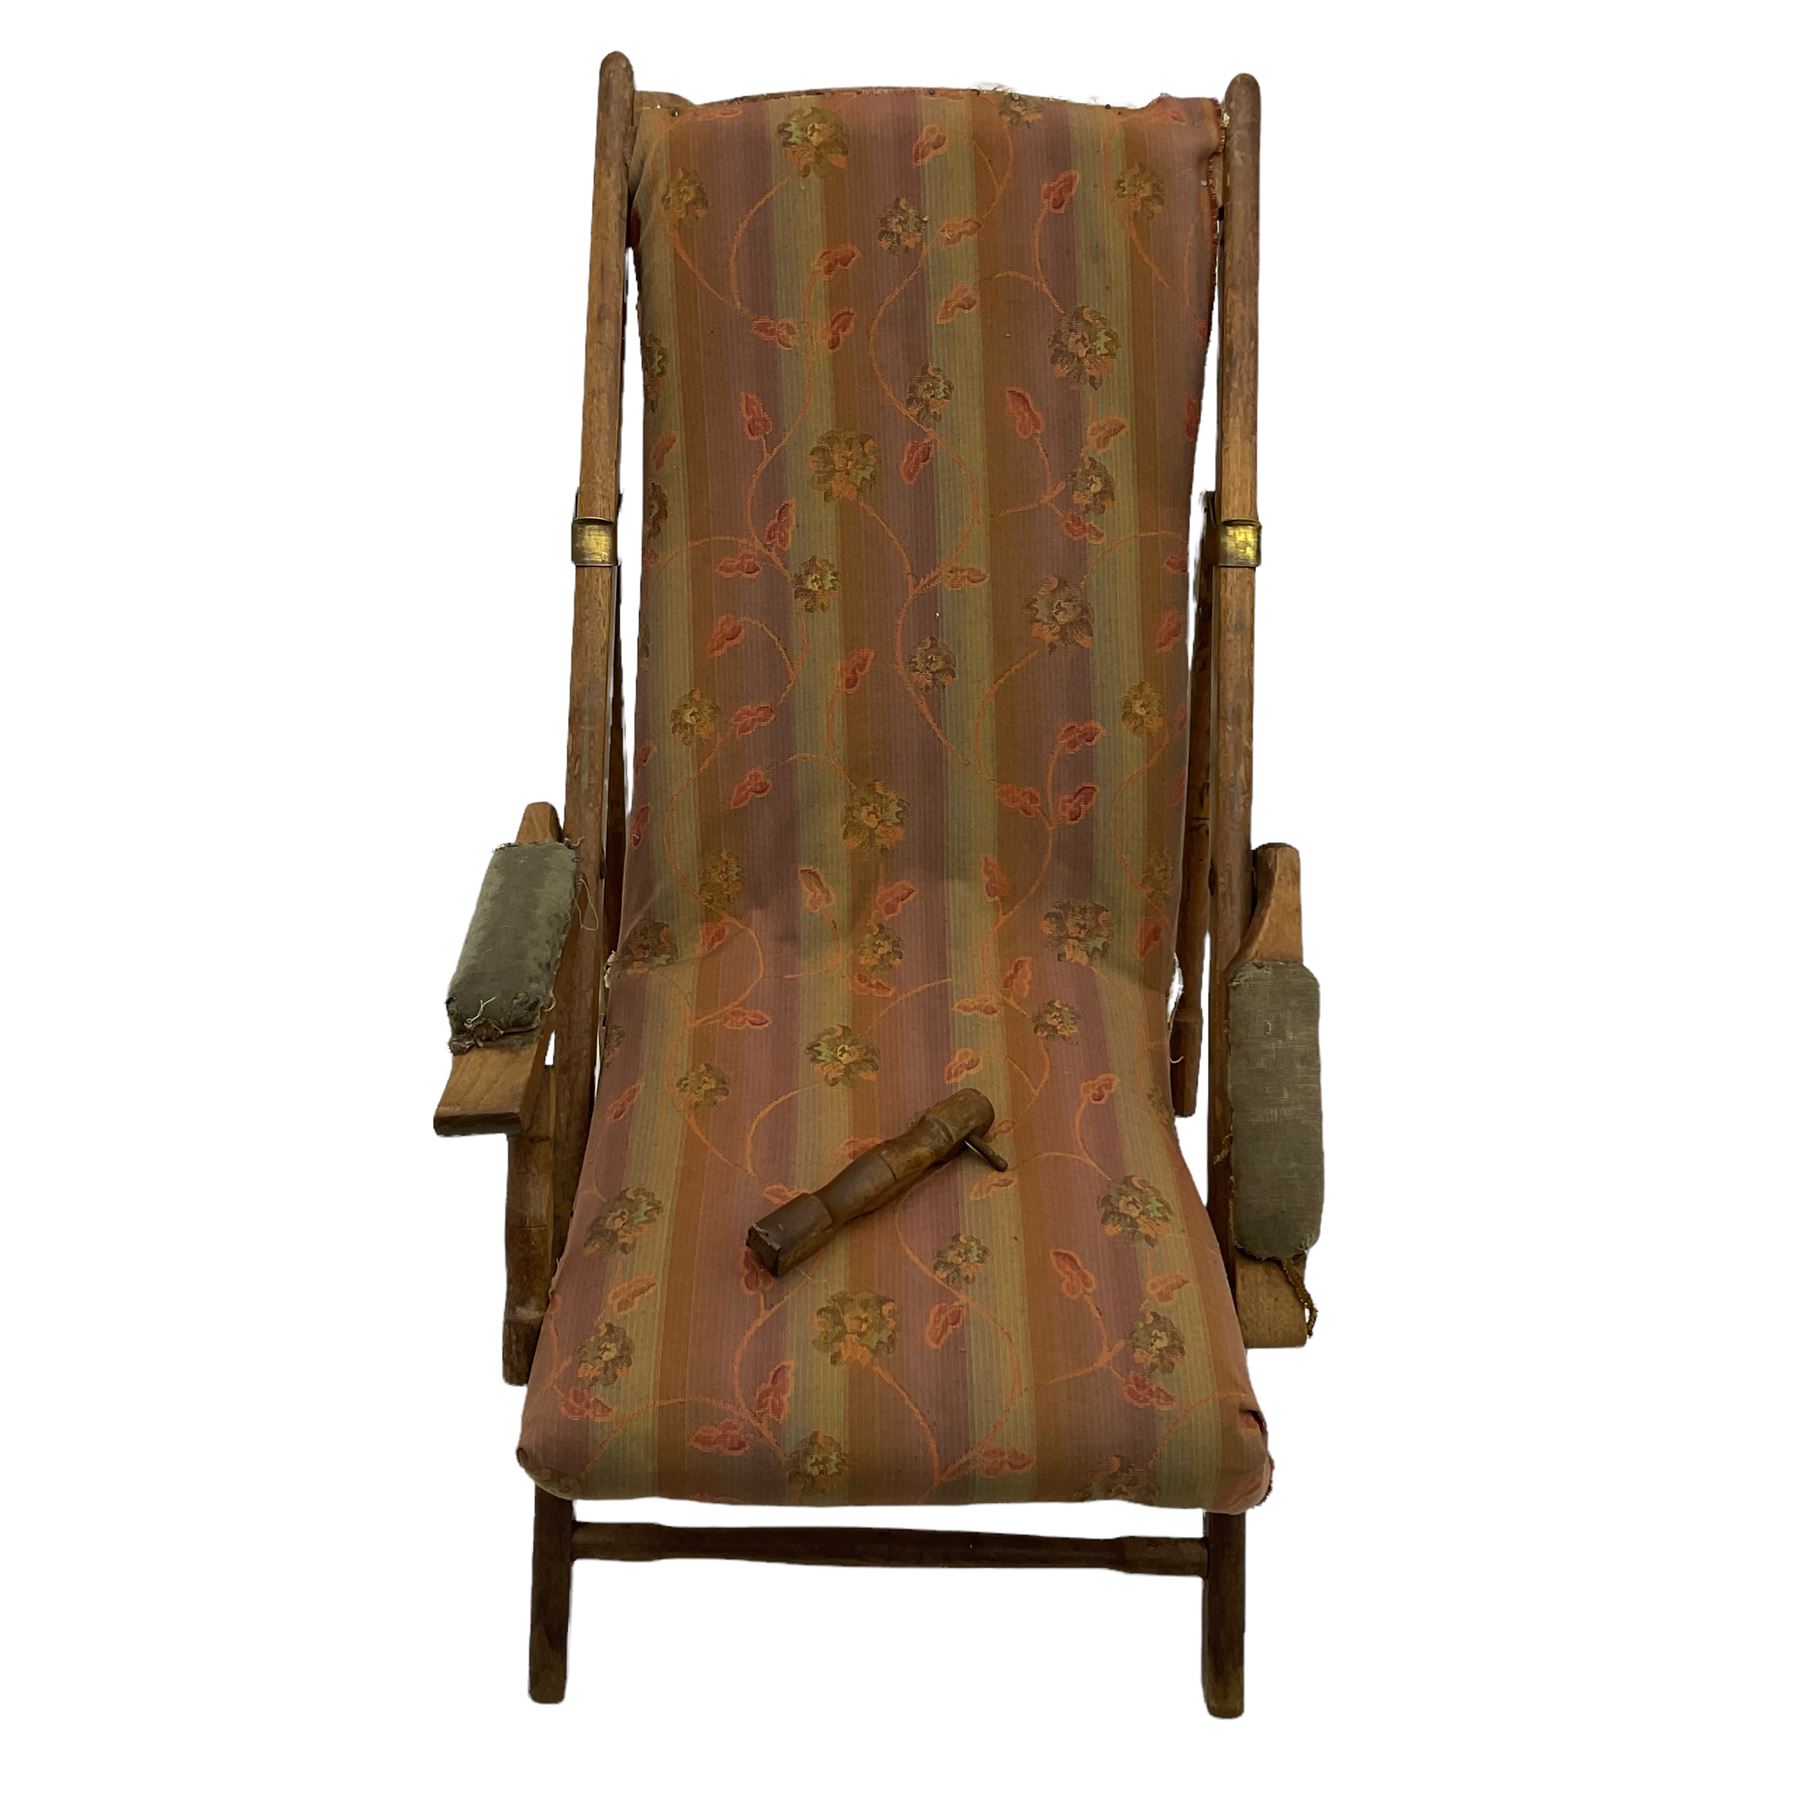 19th century teak campaign steamer or garden chair - Image 3 of 5